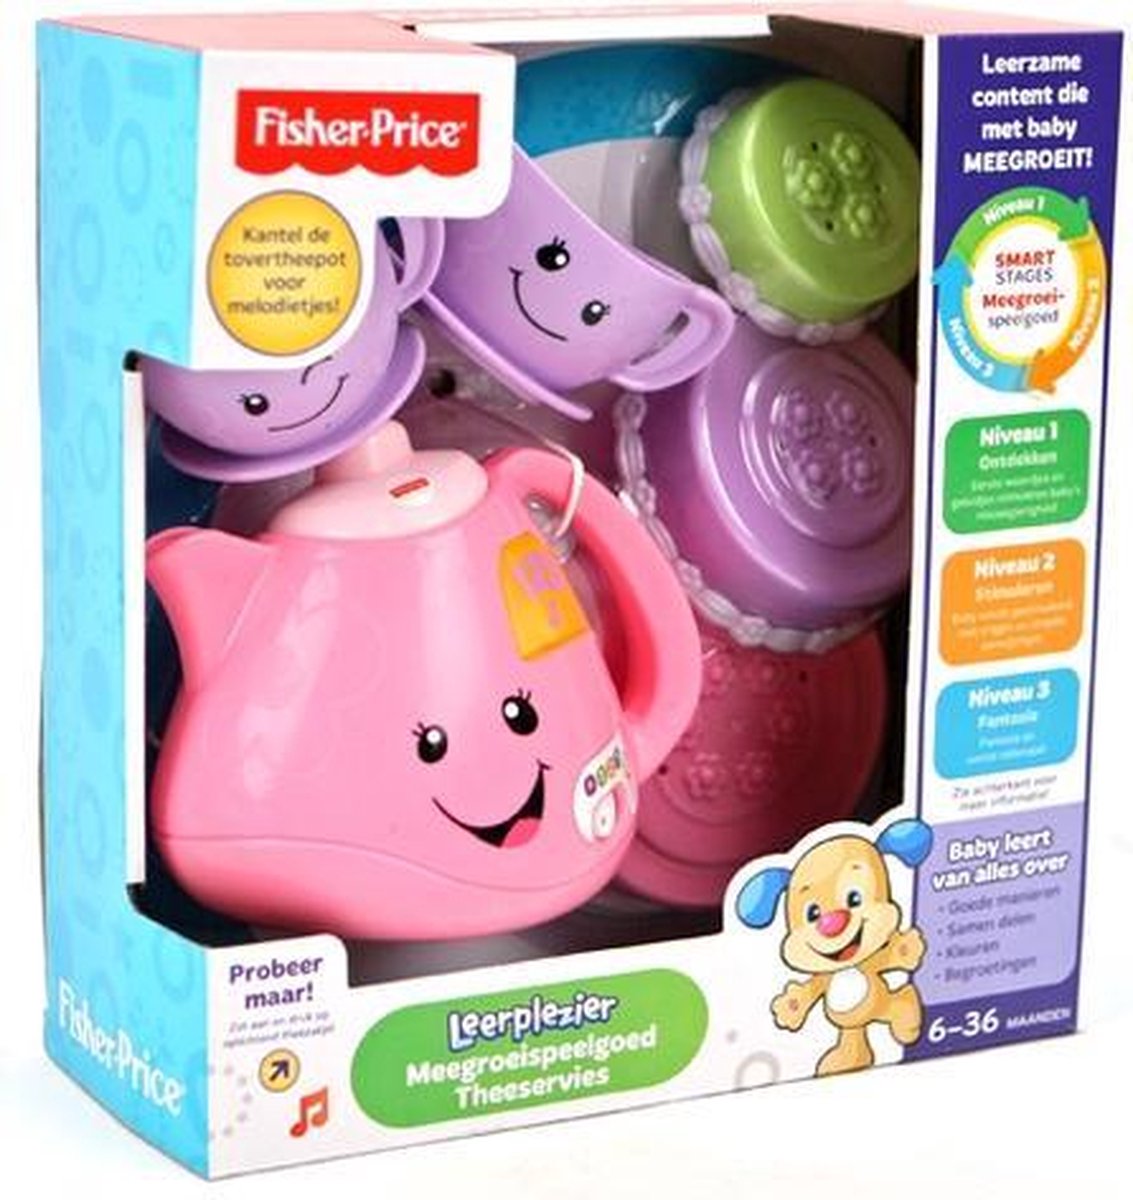 honing geloof catalogus Fisher-Price Theeservies | bol.com